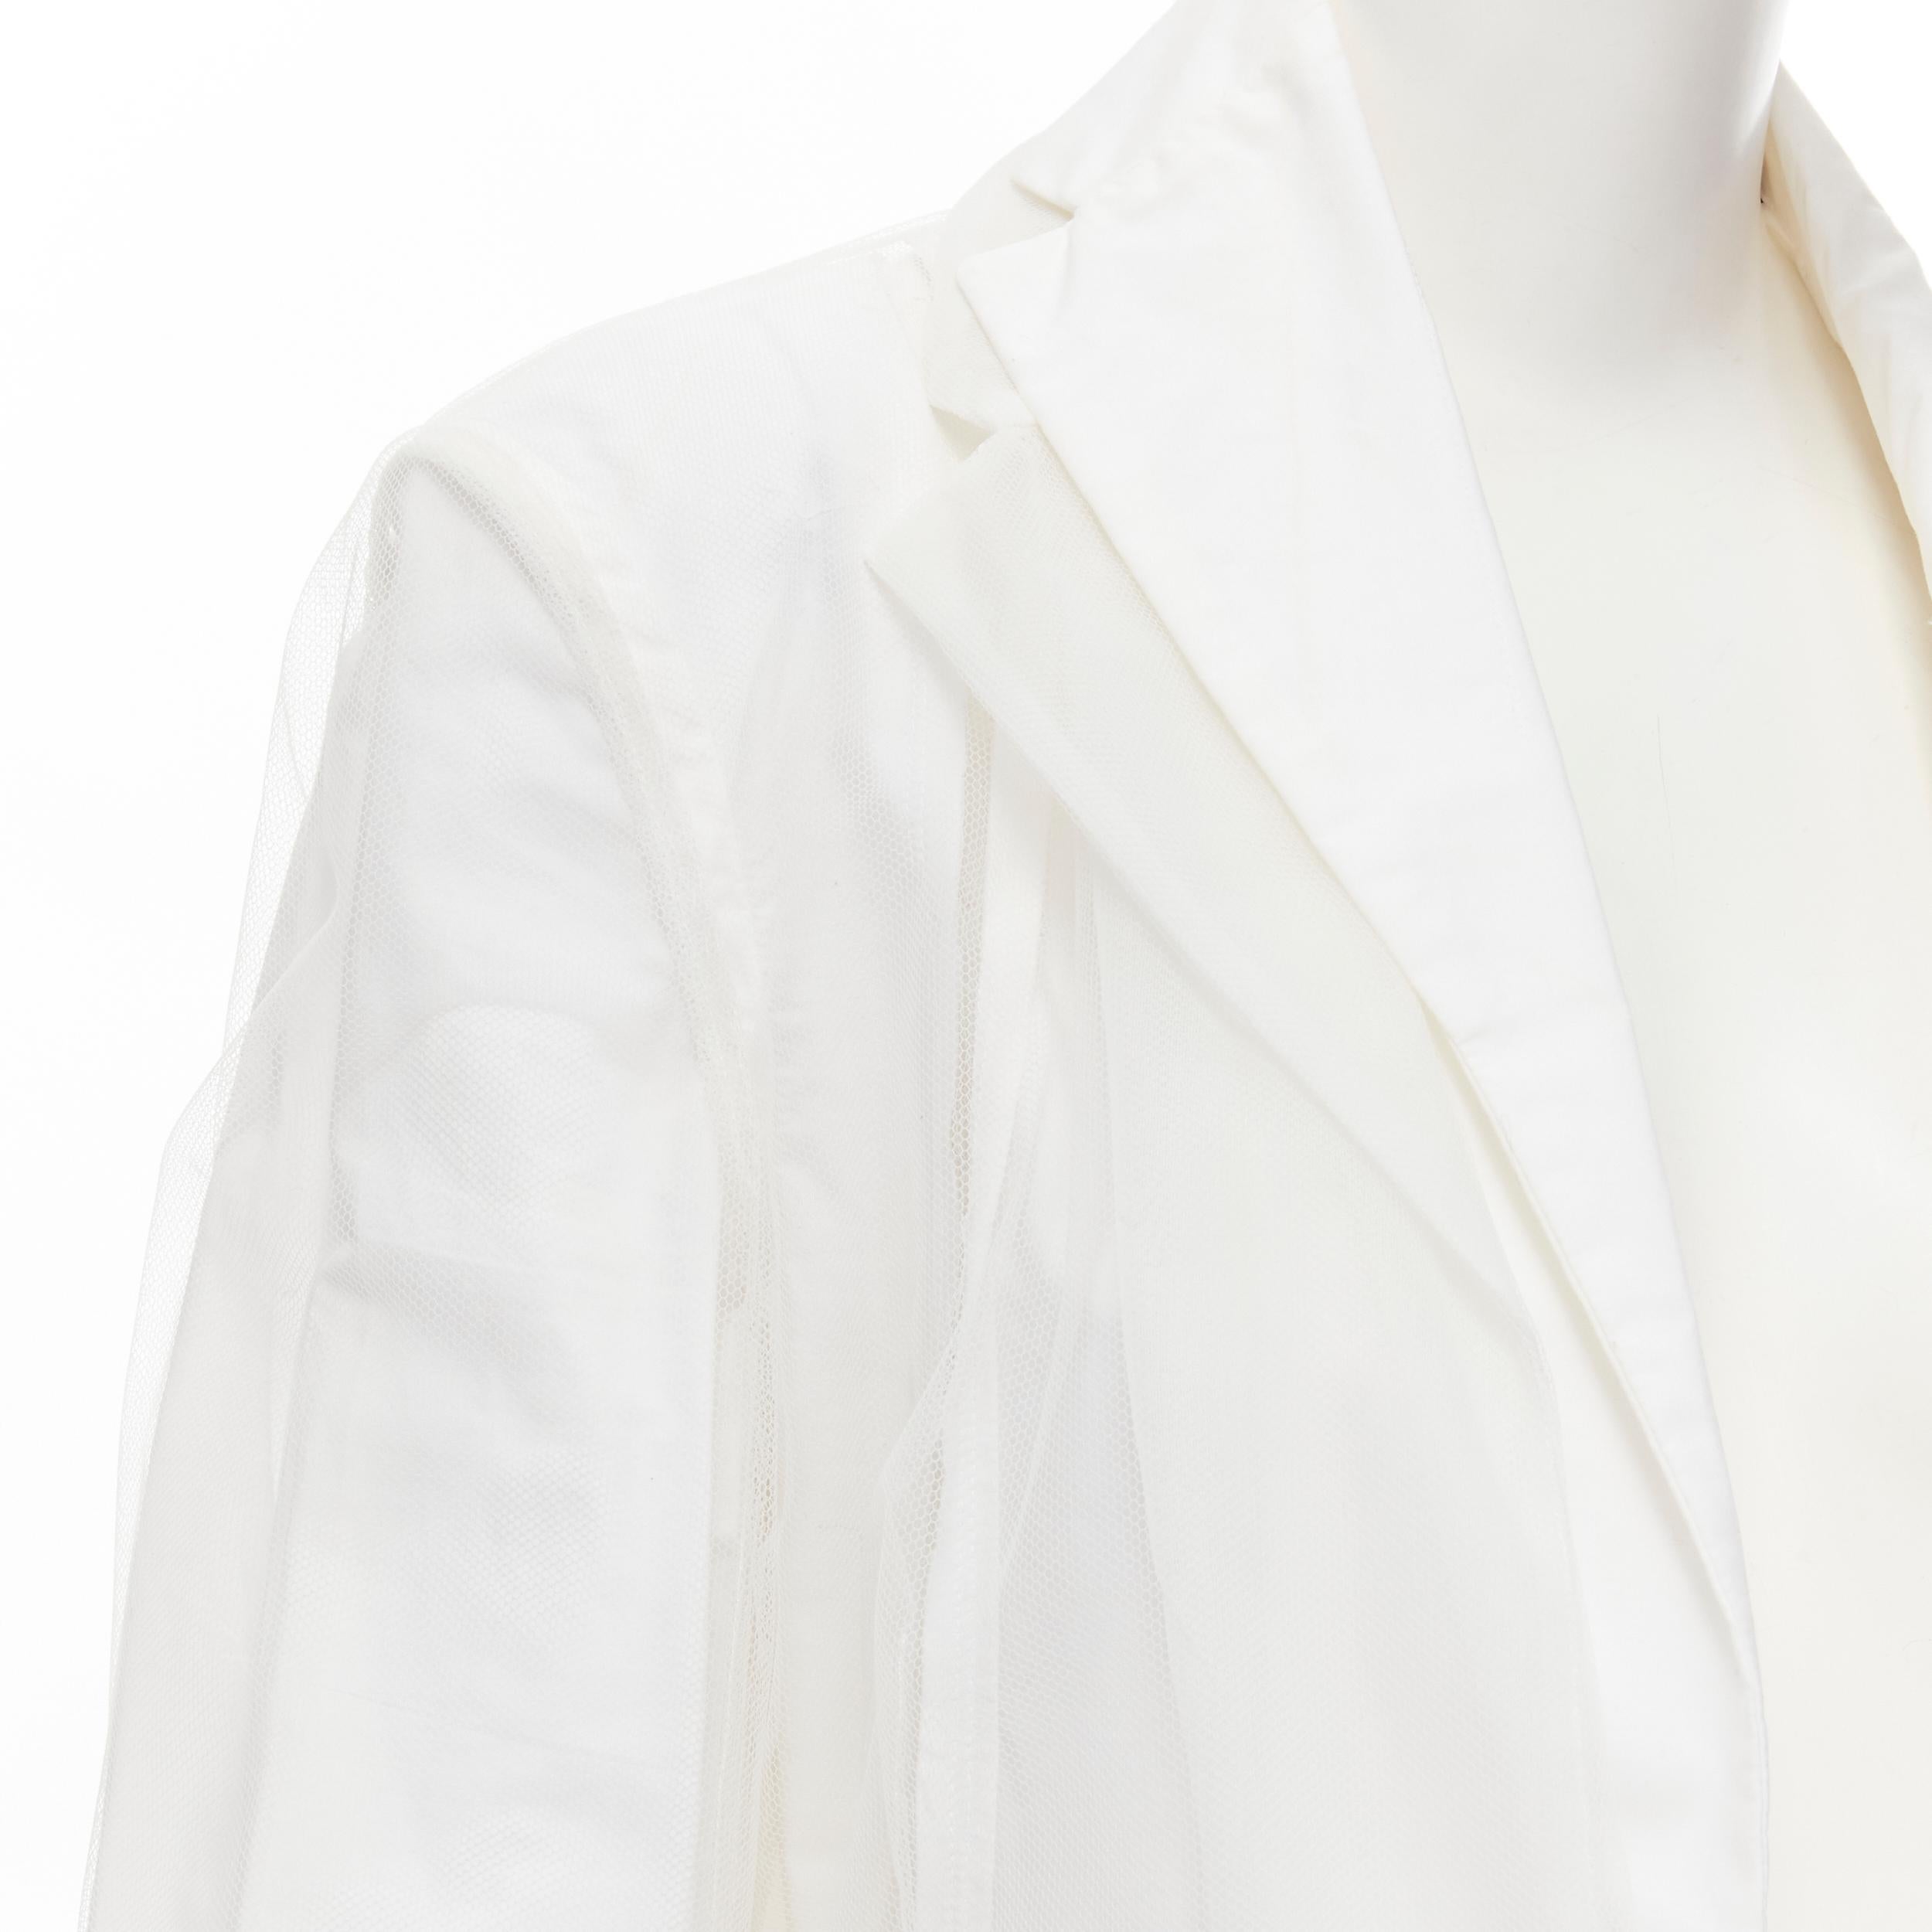 COMME DES GARCONS 2006 Runway Rising Sun deconstructed white layered blazer M For Sale 3